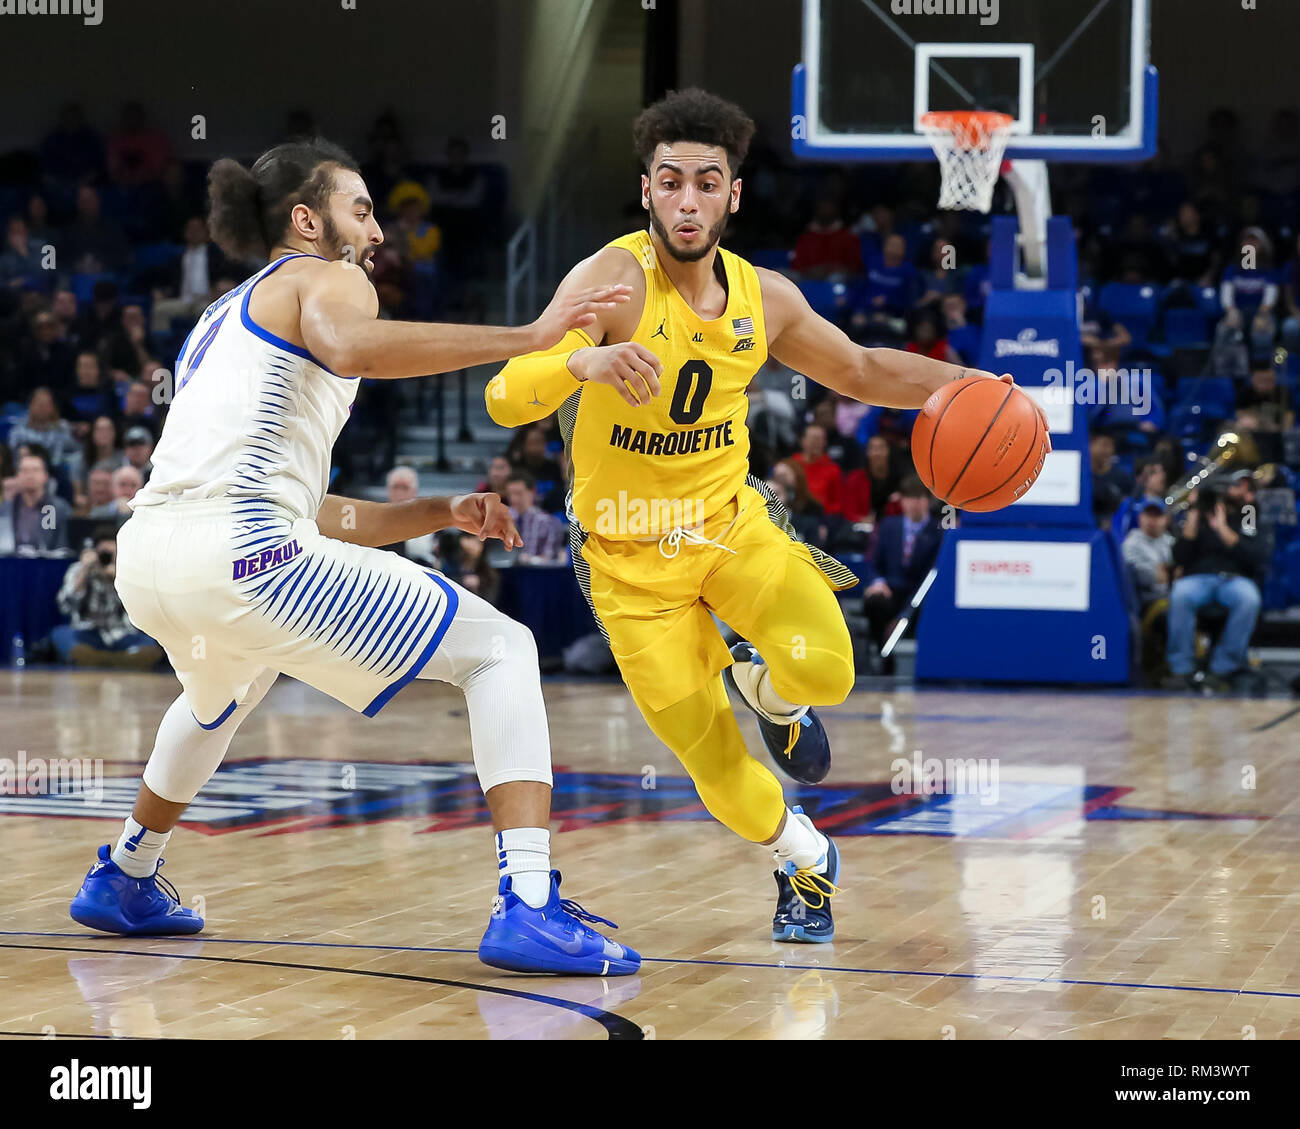 Chicago, USA. 12th Feb 2019. Marquette Golden Eagles guard Markus Howard (0) drives from the top of the key during NCAA basketball game between the Marquette Golden Eagles and the DePaul University Blue Demons at Wintrust Arena in Chicago IL. Gary E. Duncan Sr/CSM Credit: Cal Sport Media/Alamy Live News Stock Photo